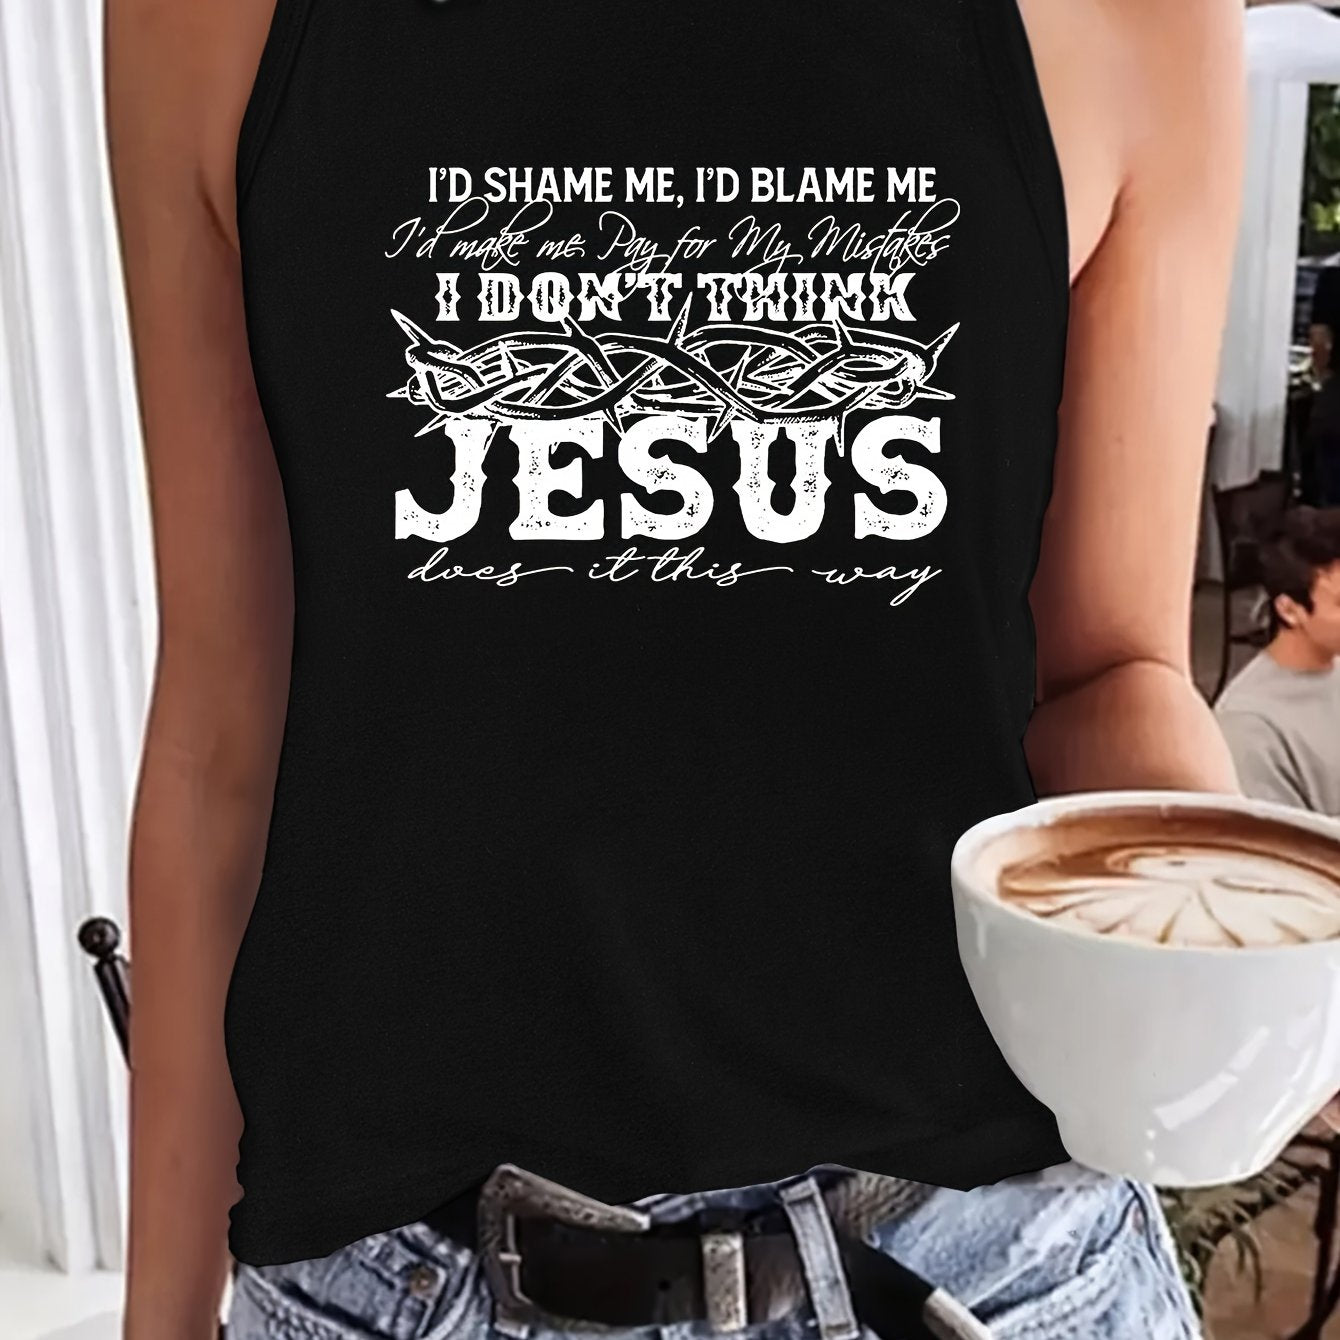 I Don't Think Jesus Does It This Way Women's Christian Tank Top claimedbygoddesigns